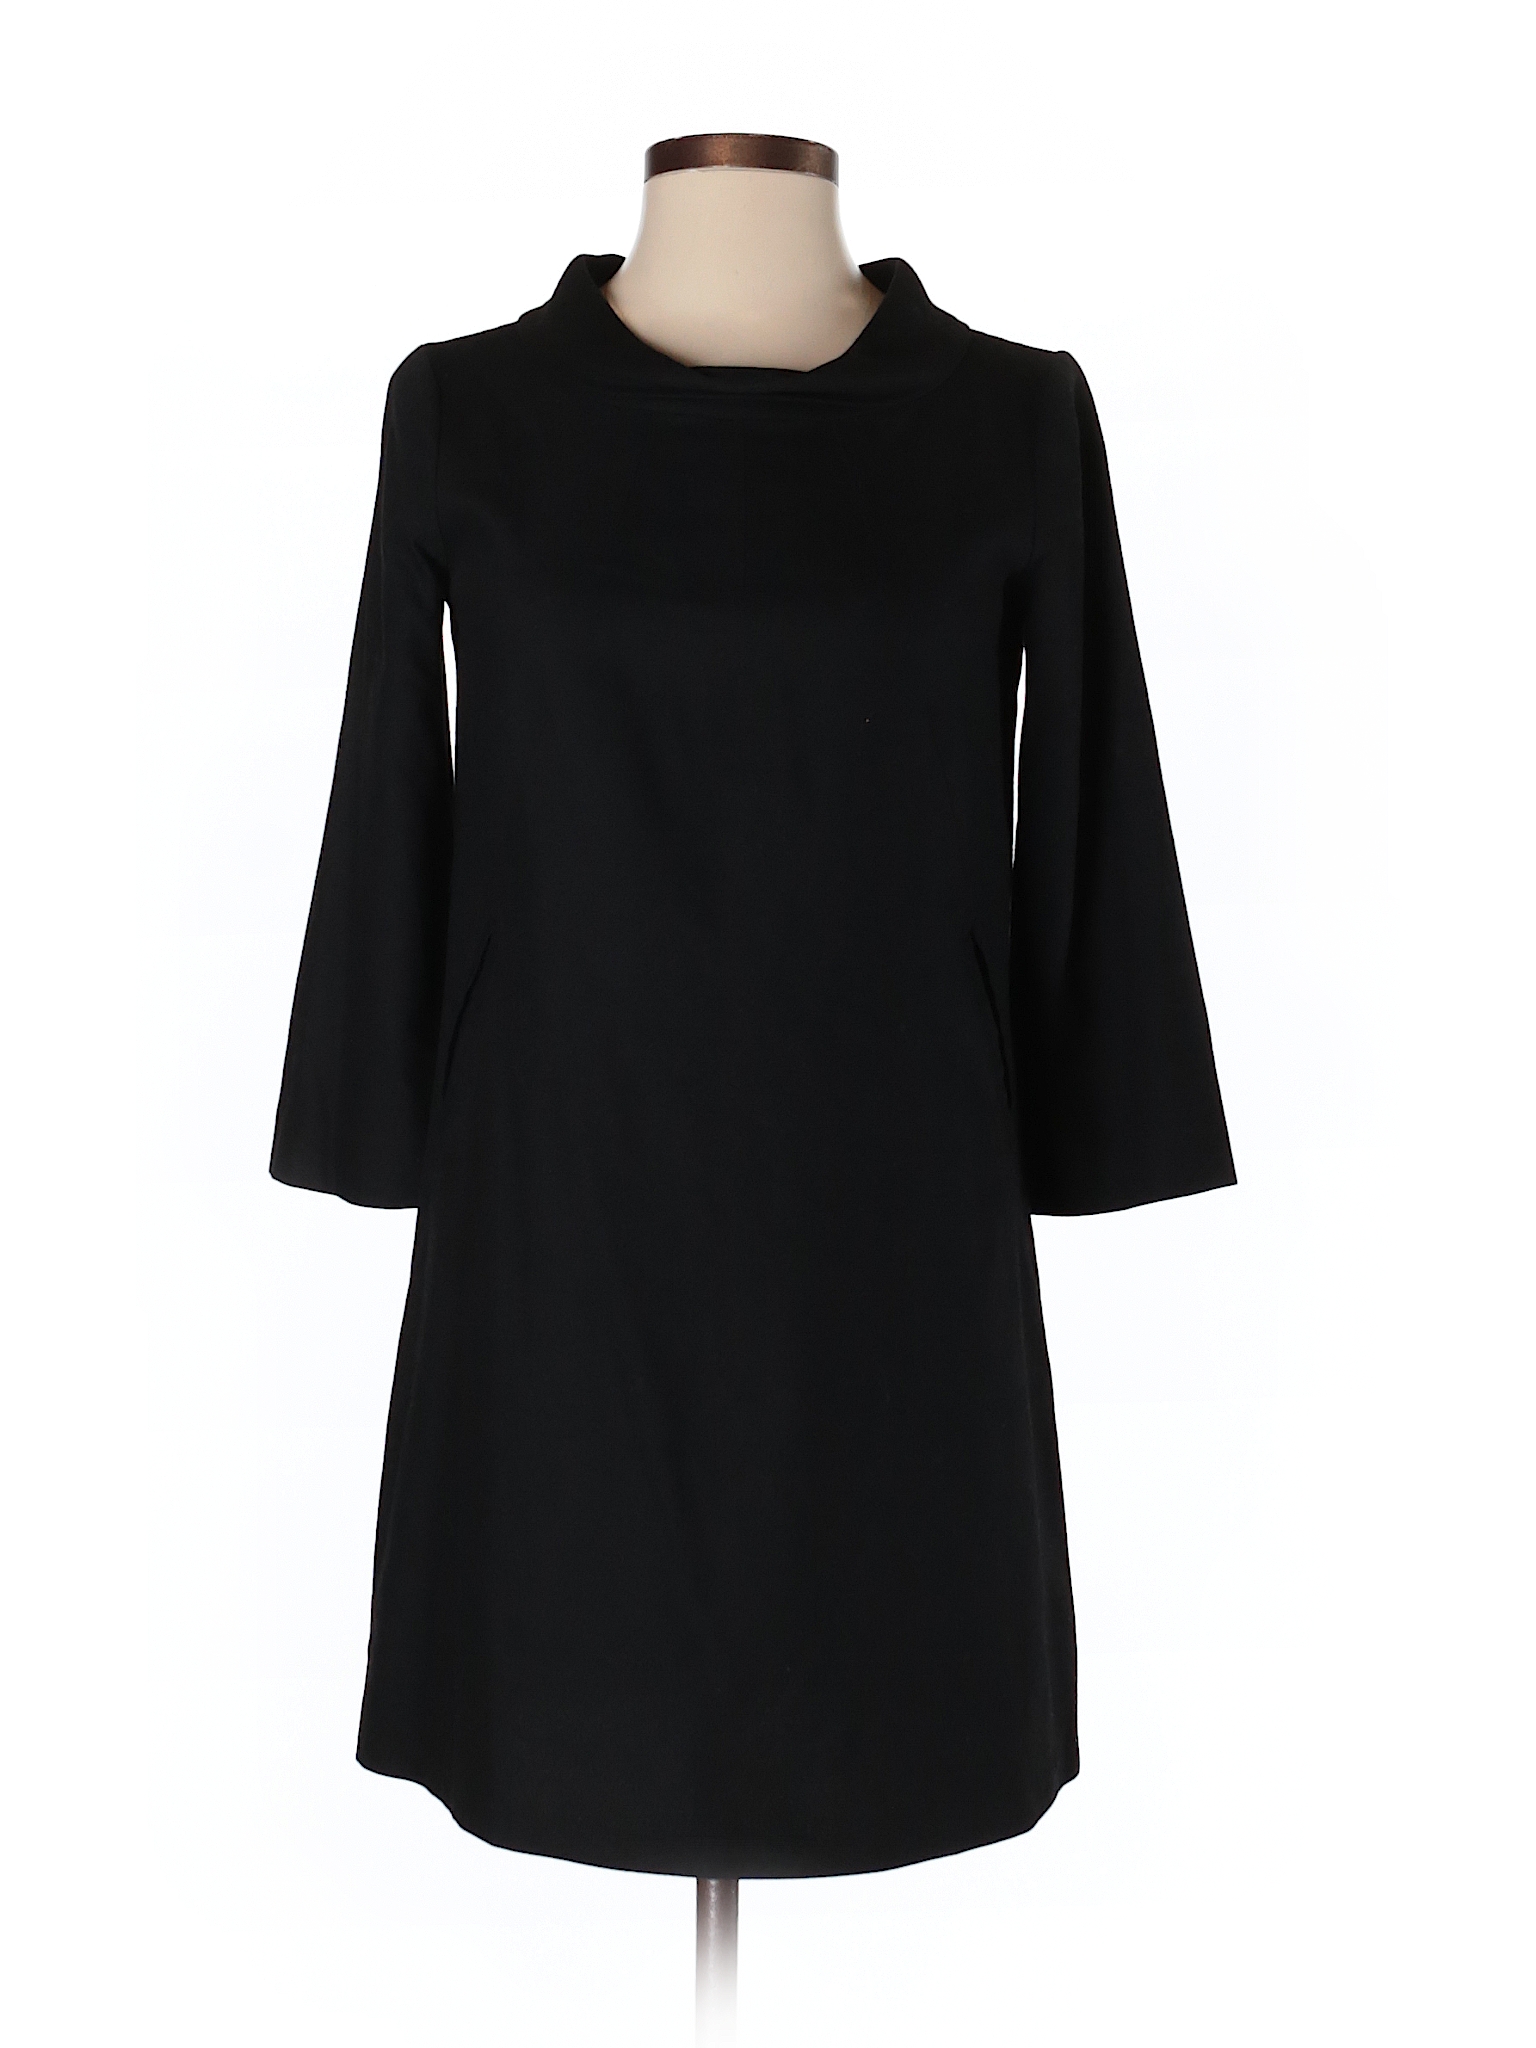 Theory Solid Black Casual Dress Size 2 - 88% off | thredUP